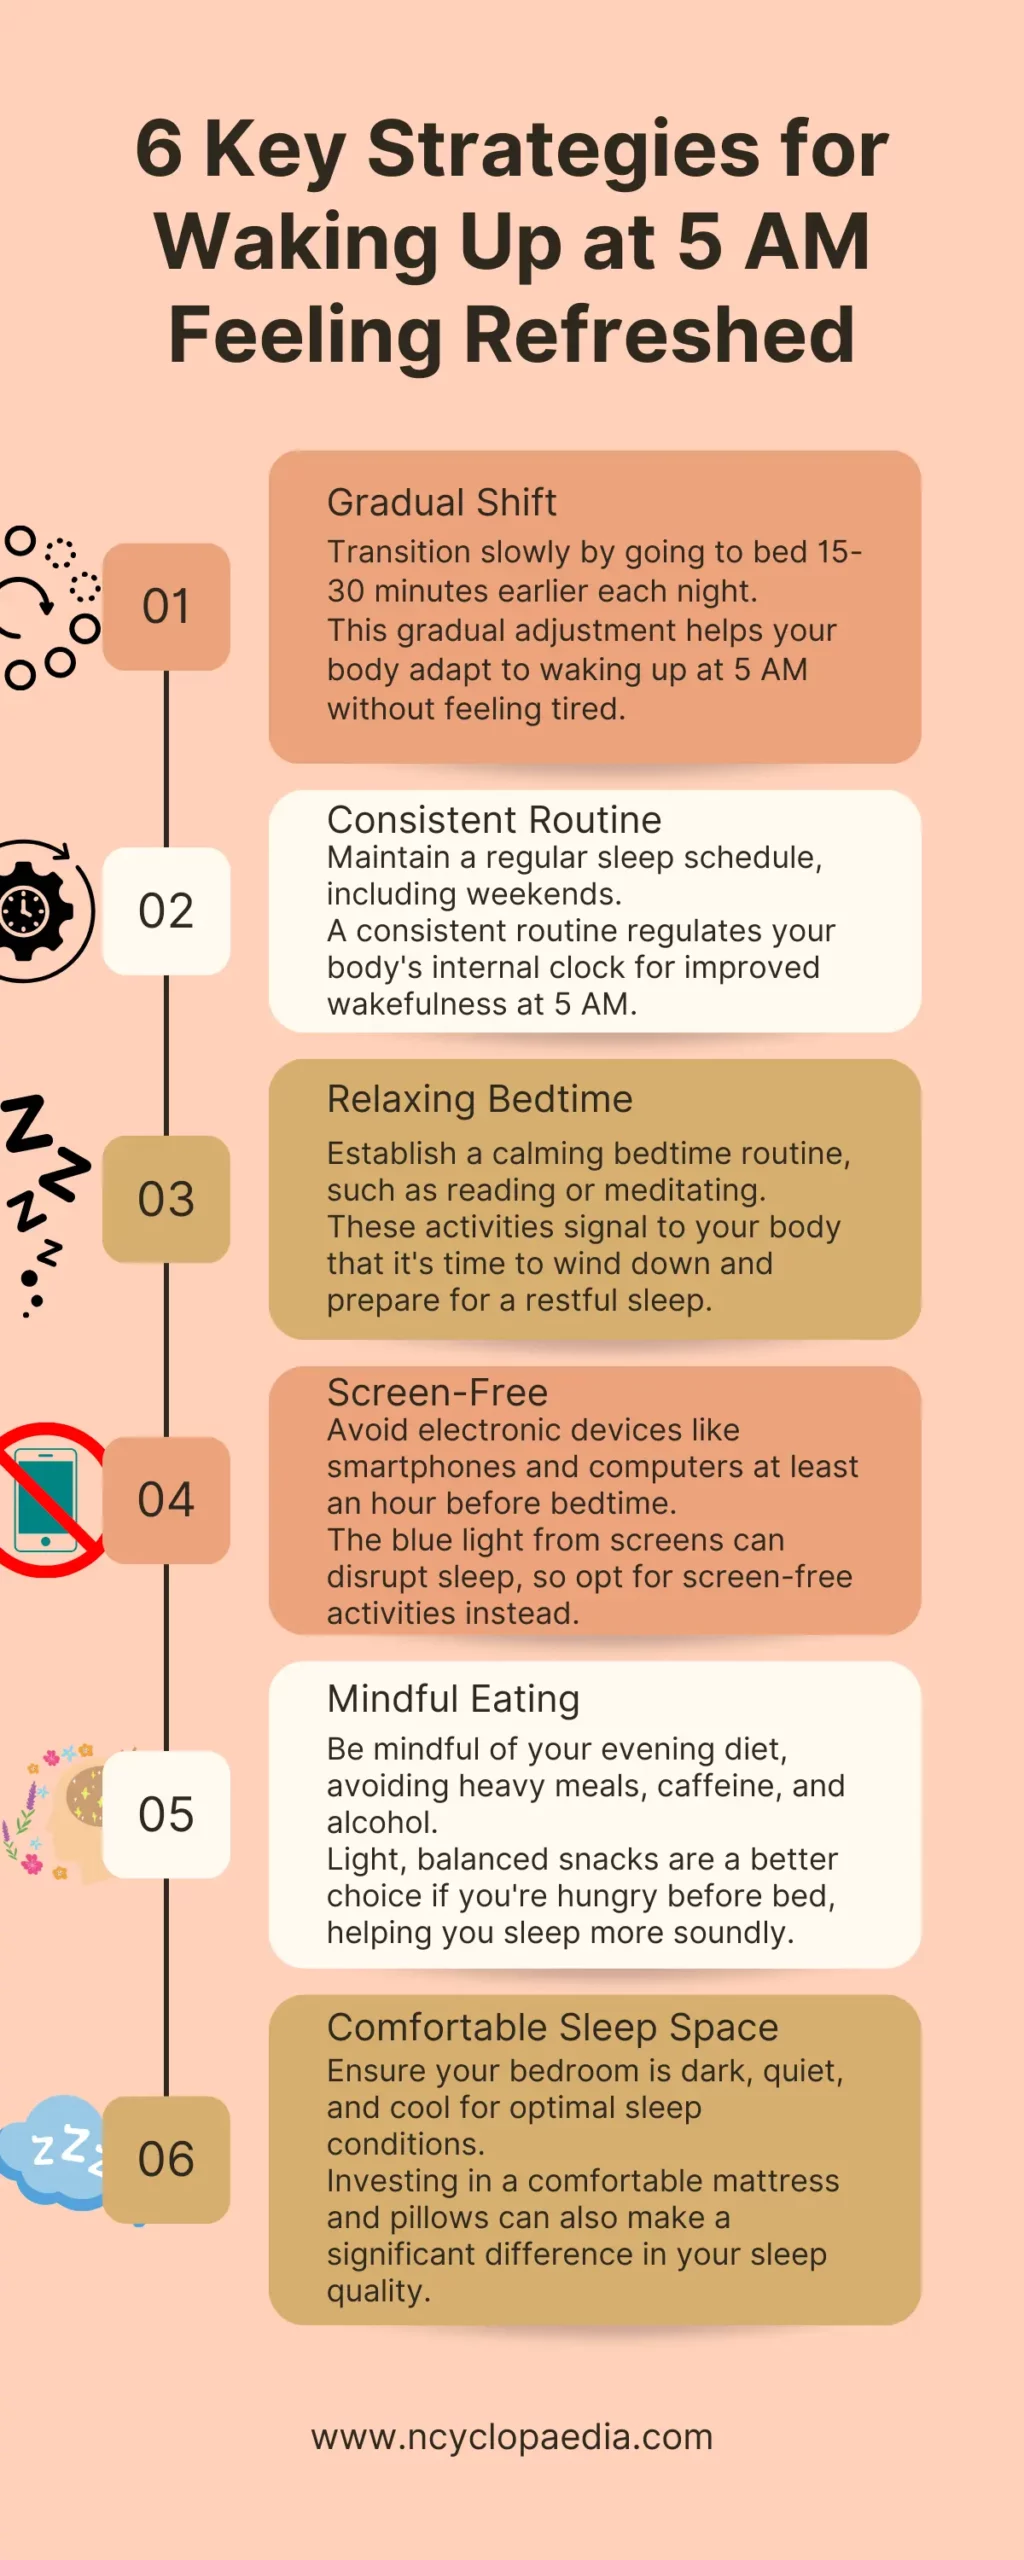 Key Strategies for Waking Up at 5 AM Feeling Refreshed